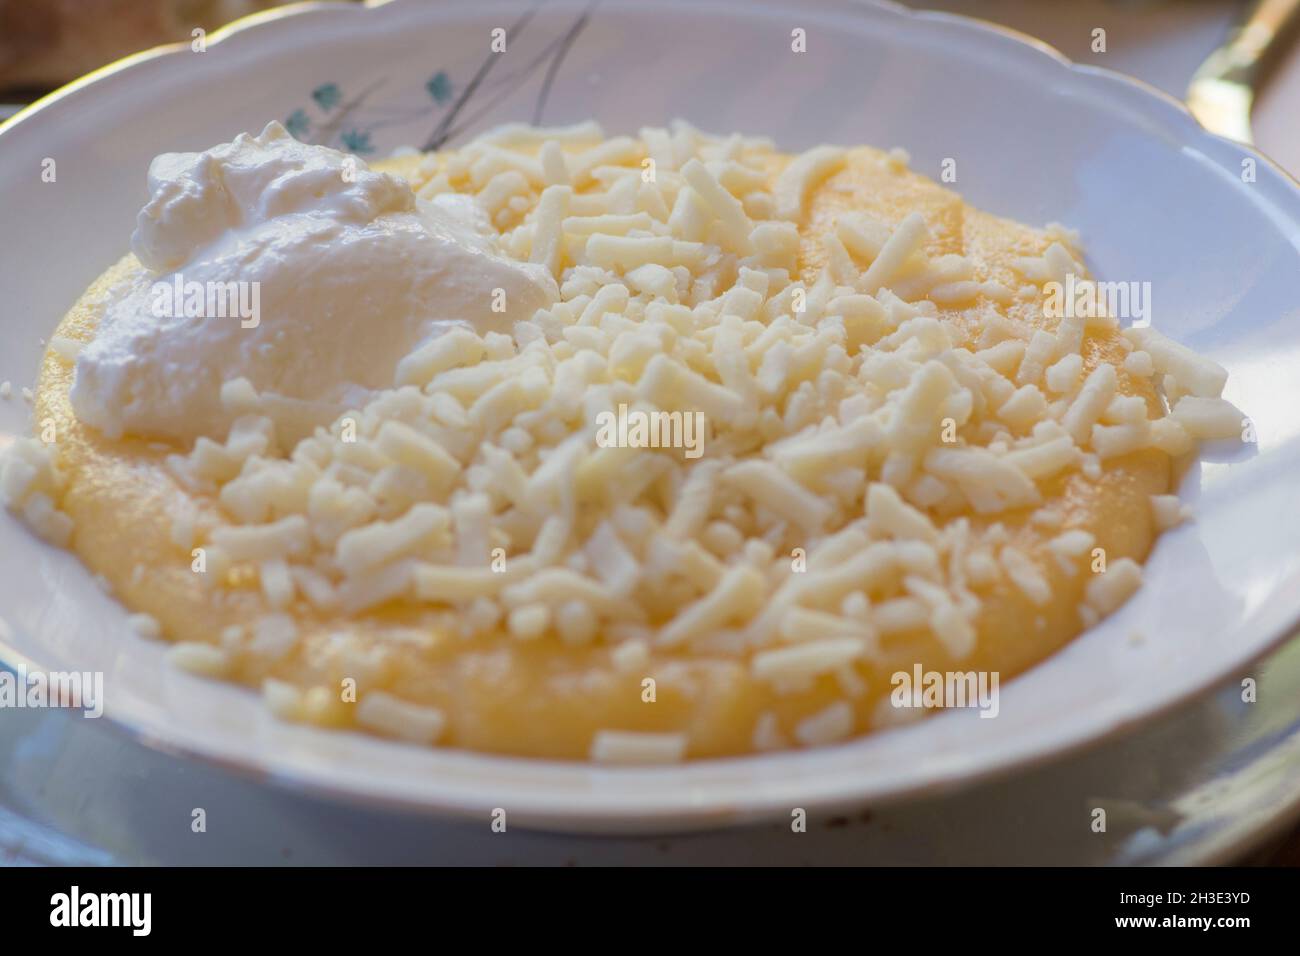 Mamaliga with Cheese, a porridge made out of yellow maize flour, traditional in Romania, Moldova and West Ukraine Stock Photo